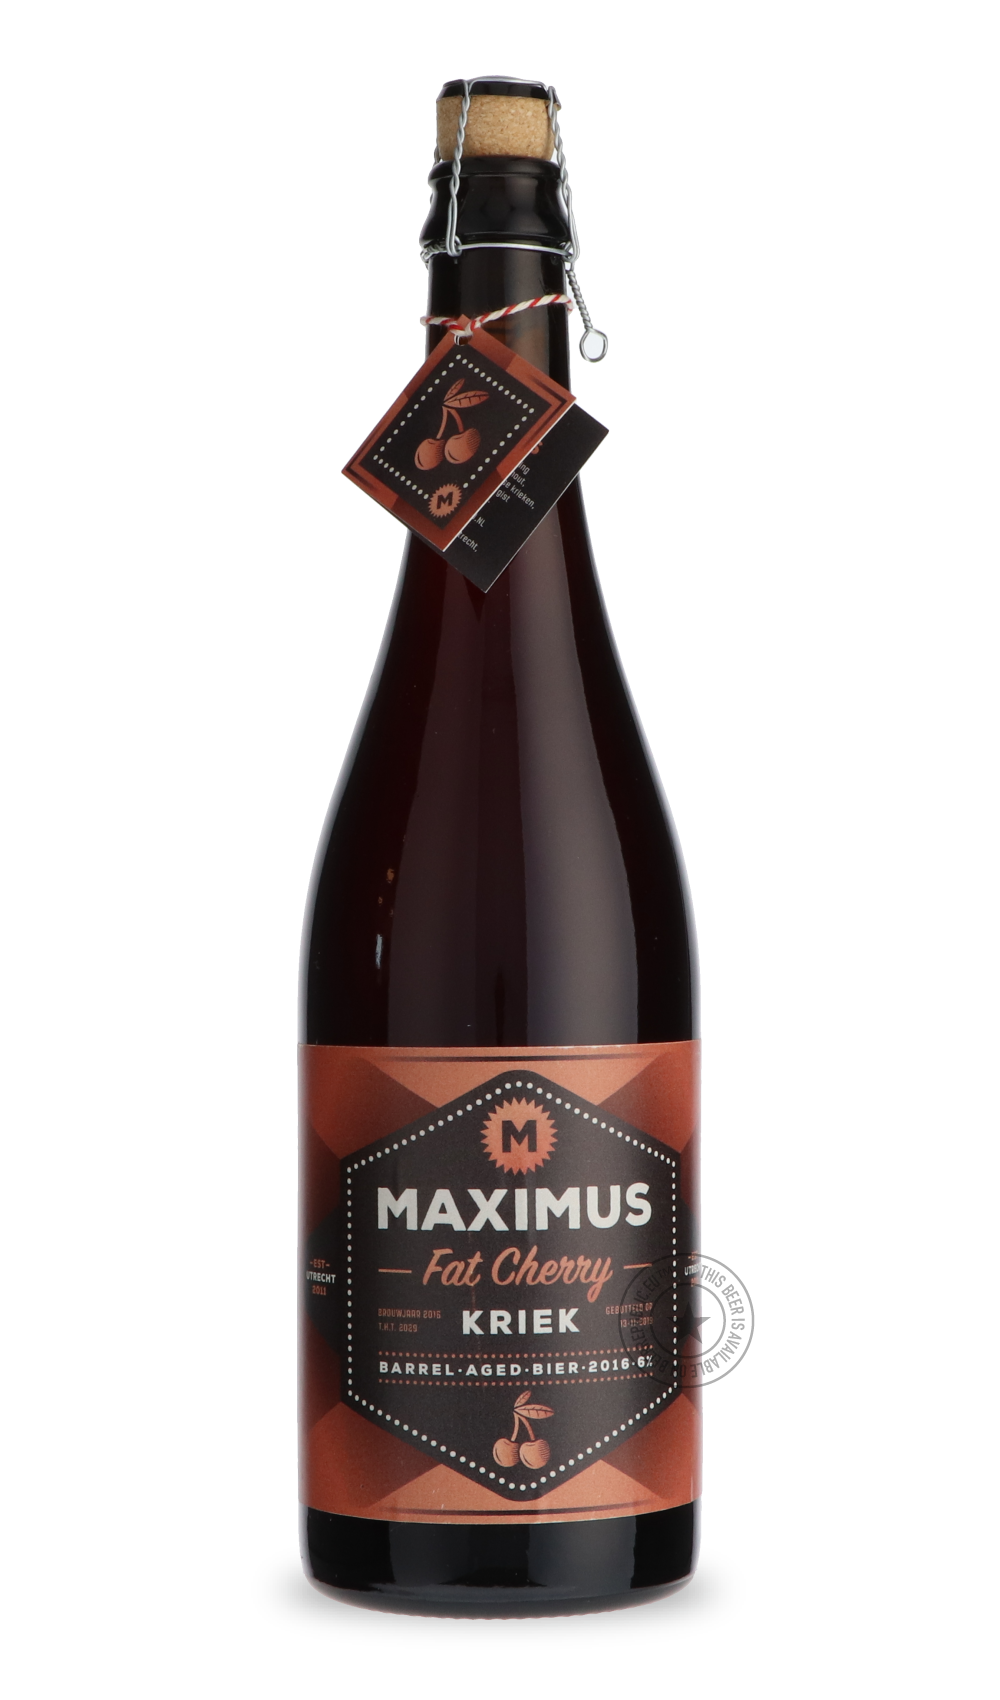 -Maximus- Fat Cherry-Sour / Wild & Fruity- Only @ Beer Republic - The best online beer store for American & Canadian craft beer - Buy beer online from the USA and Canada - Bier online kopen - Amerikaans bier kopen - Craft beer store - Craft beer kopen - Amerikanisch bier kaufen - Bier online kaufen - Acheter biere online - IPA - Stout - Porter - New England IPA - Hazy IPA - Imperial Stout - Barrel Aged - Barrel Aged Imperial Stout - Brown - Dark beer - Blond - Blonde - Pilsner - Lager - Wheat - Weizen - Amb